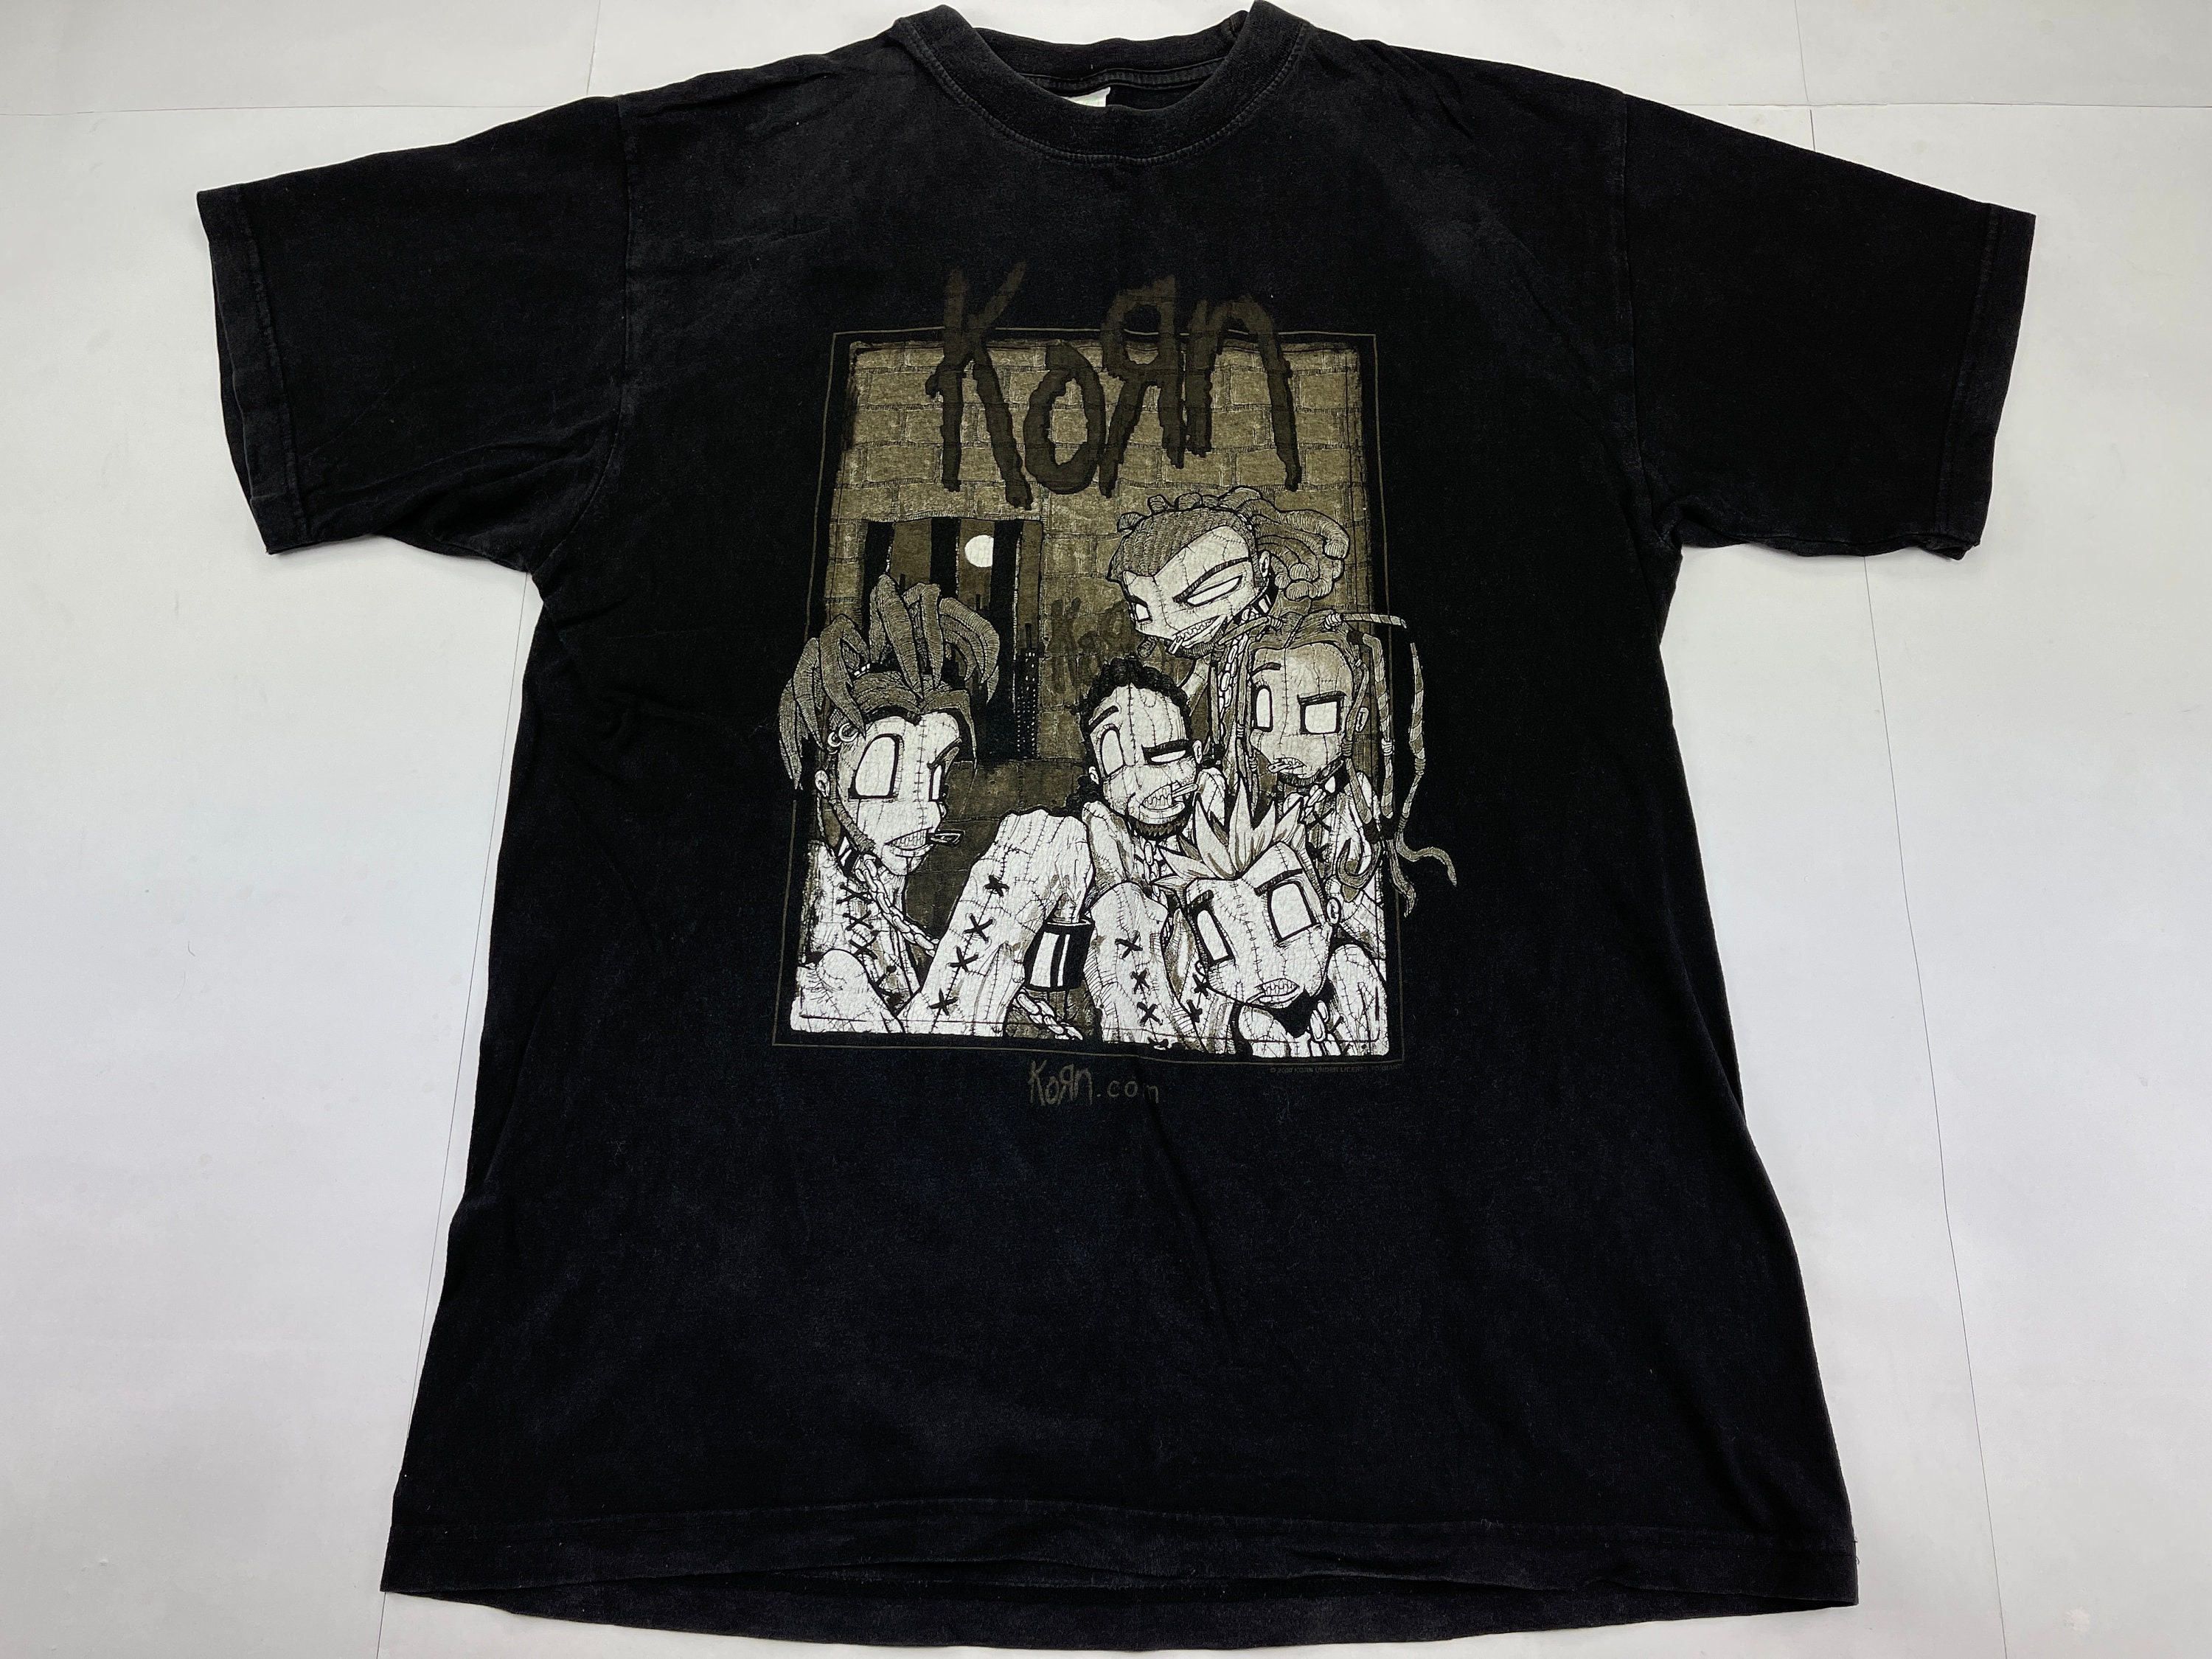 Korn T-shirt 2000 Sick and Twisted Tour Vintage Giant Shirt - Etsy